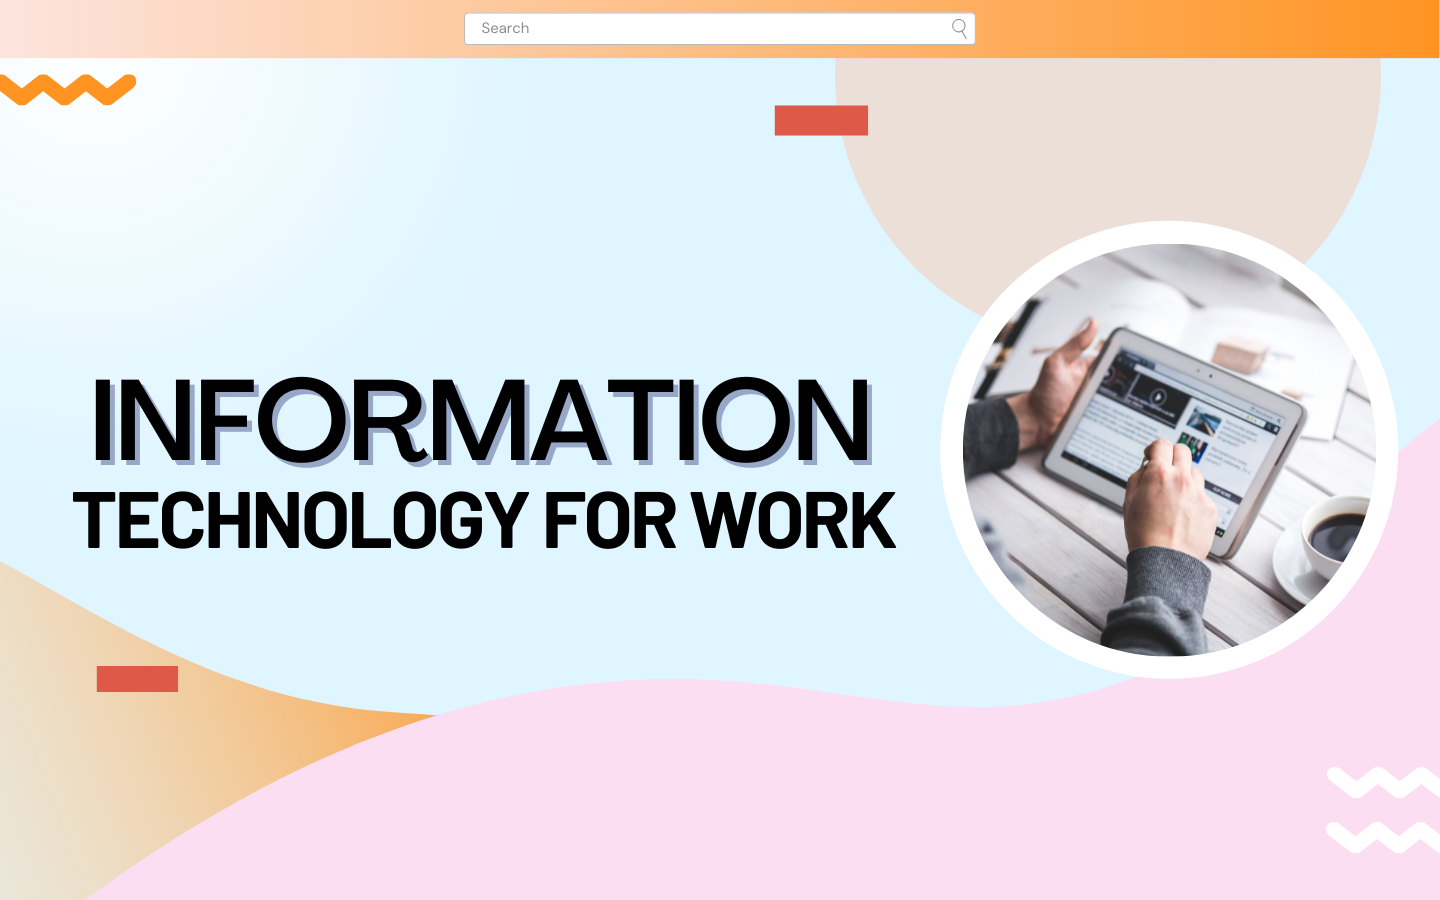 Information Technology for work